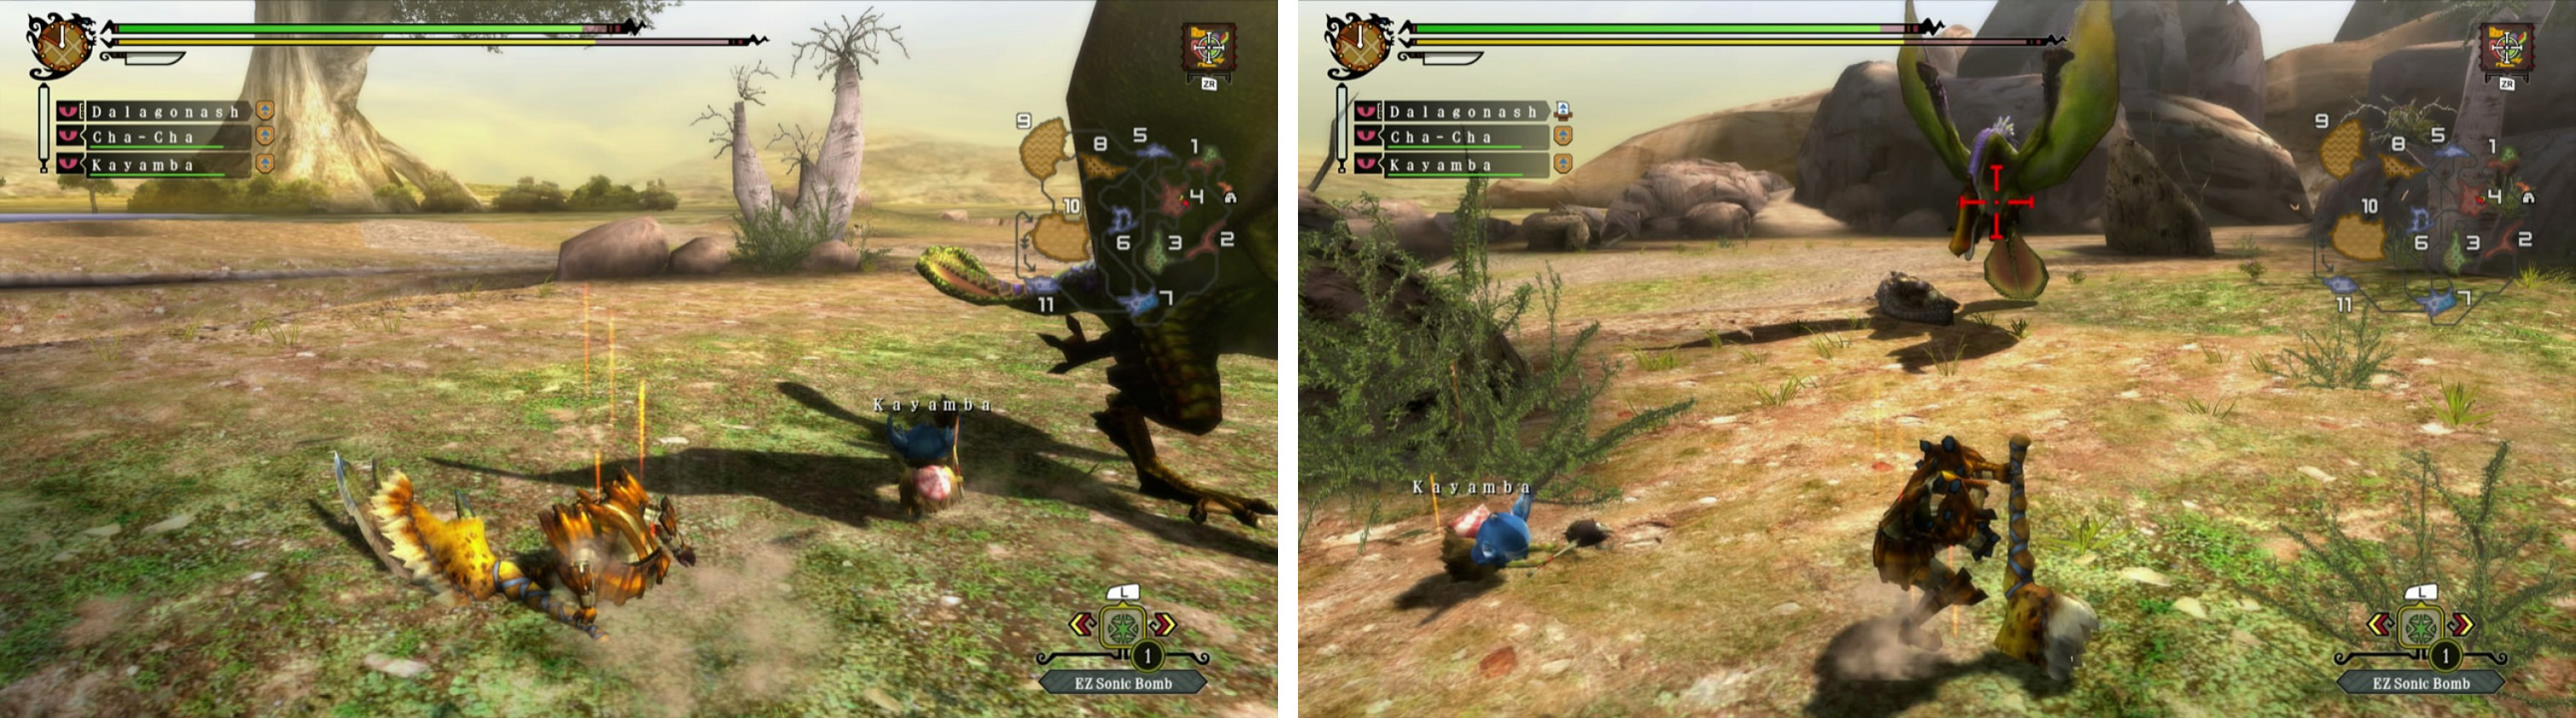 Monster Hunter controls exactly as Monster Hunter wants to control.